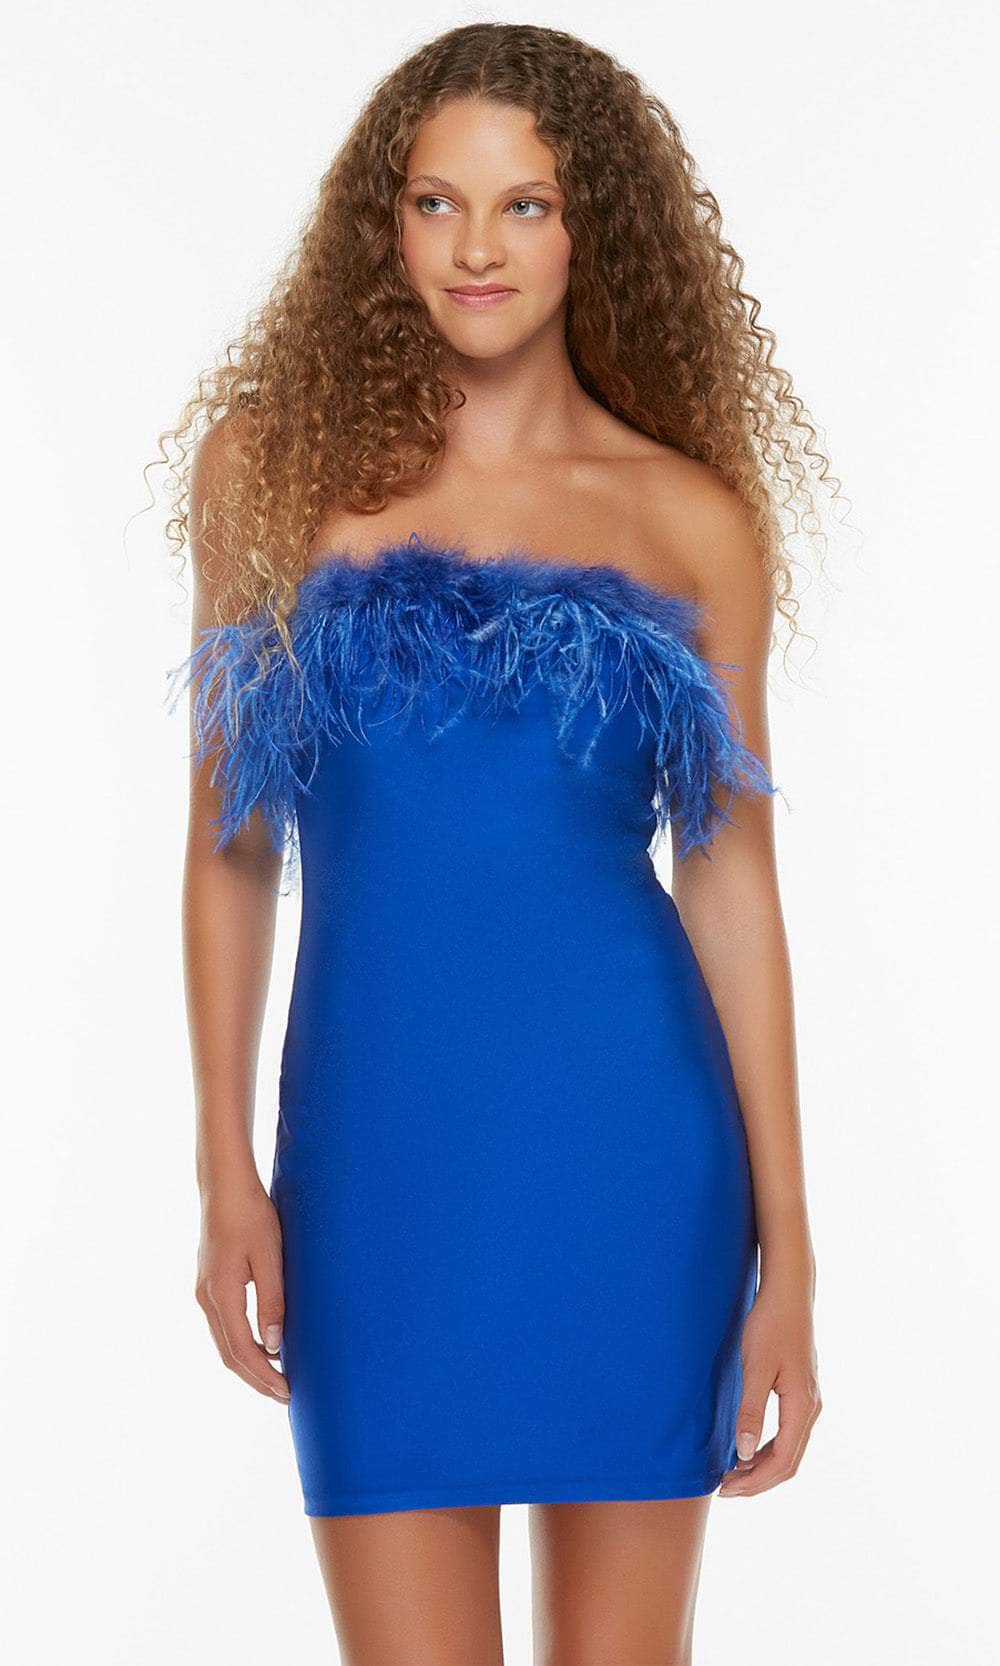 Alyce Paris 4524 - Feathered Strapless Cocktail Dress Special Occasion Dress 000 / Royal